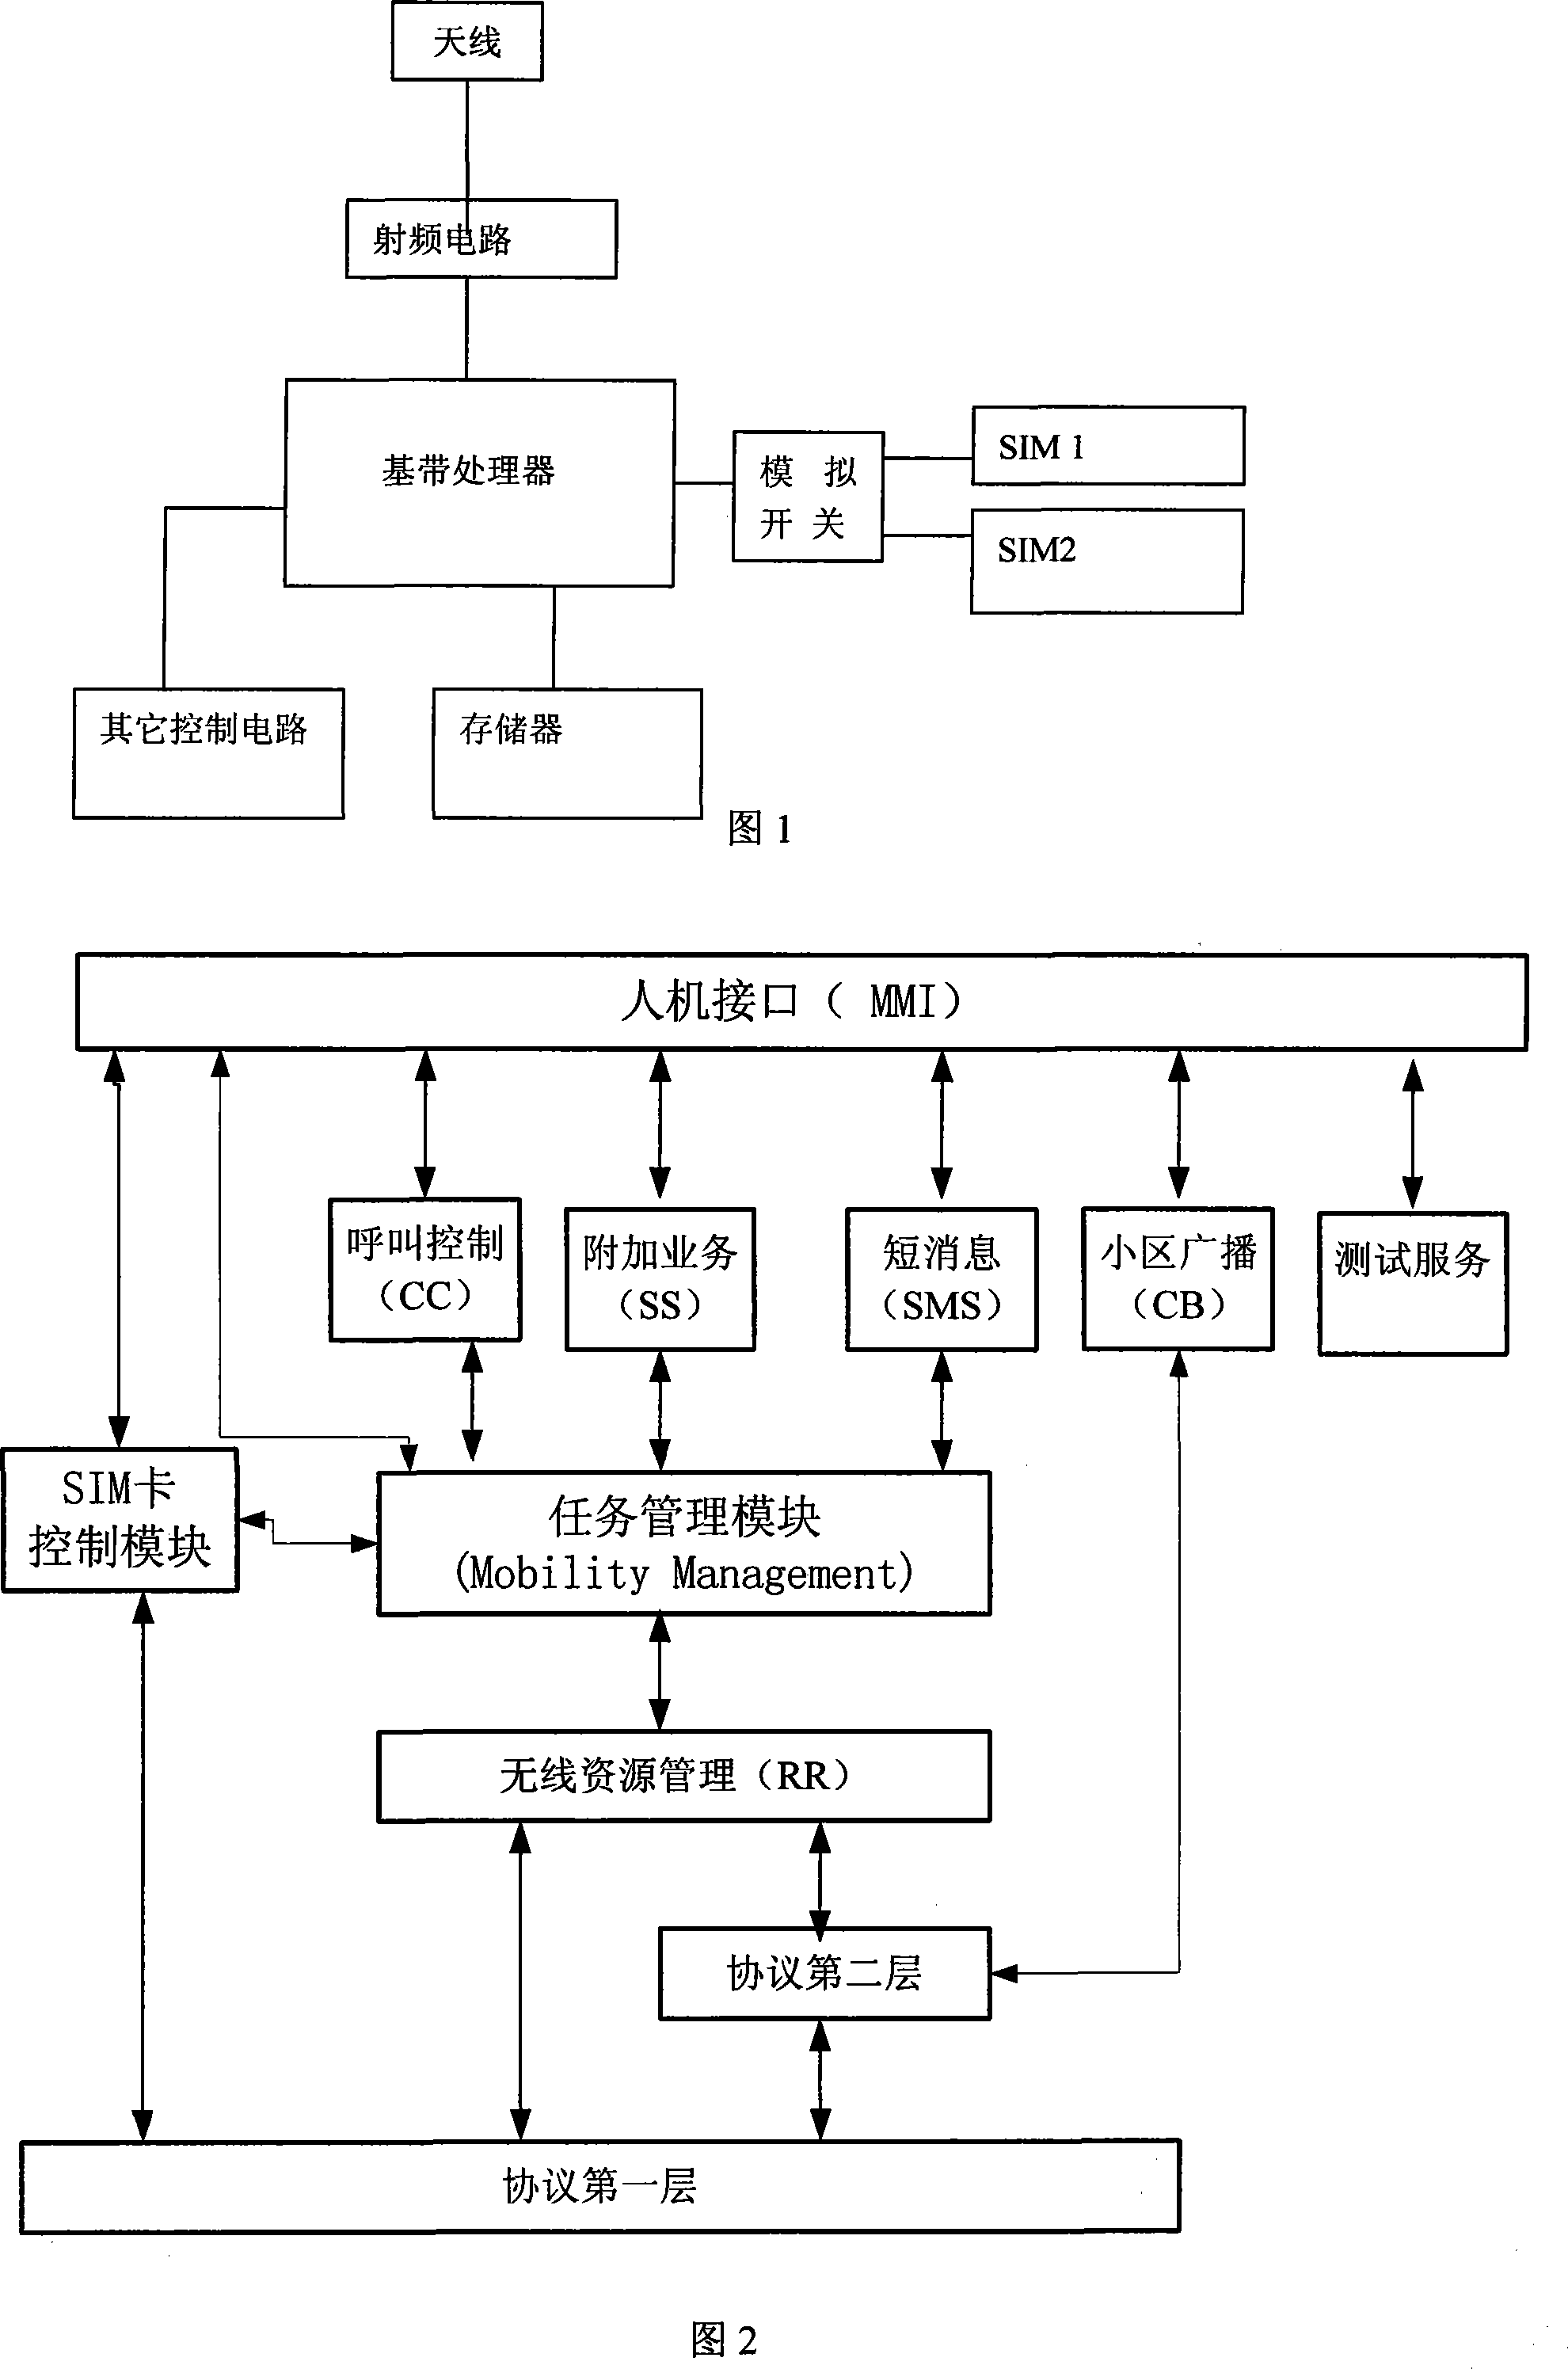 Dual-SIM dual-standby mobile phone and its SIM card initialization method